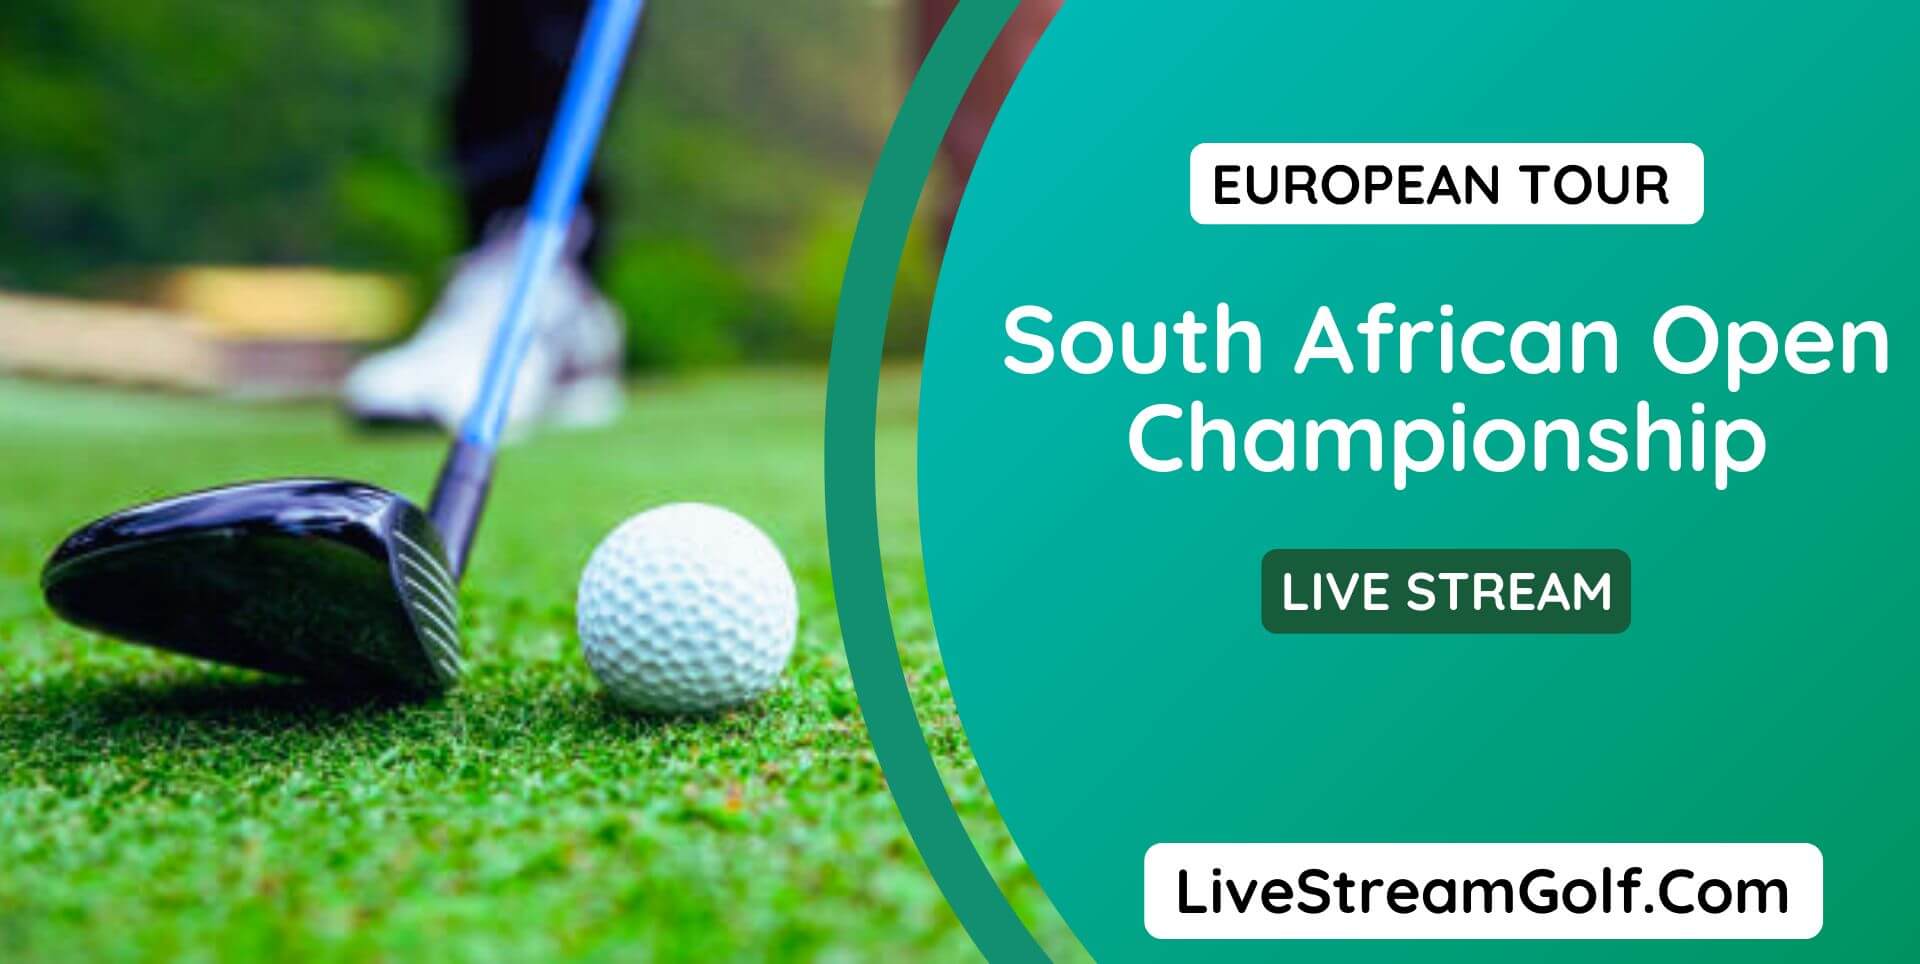 South African Open Day 4 Live Stream: European Tour 2022